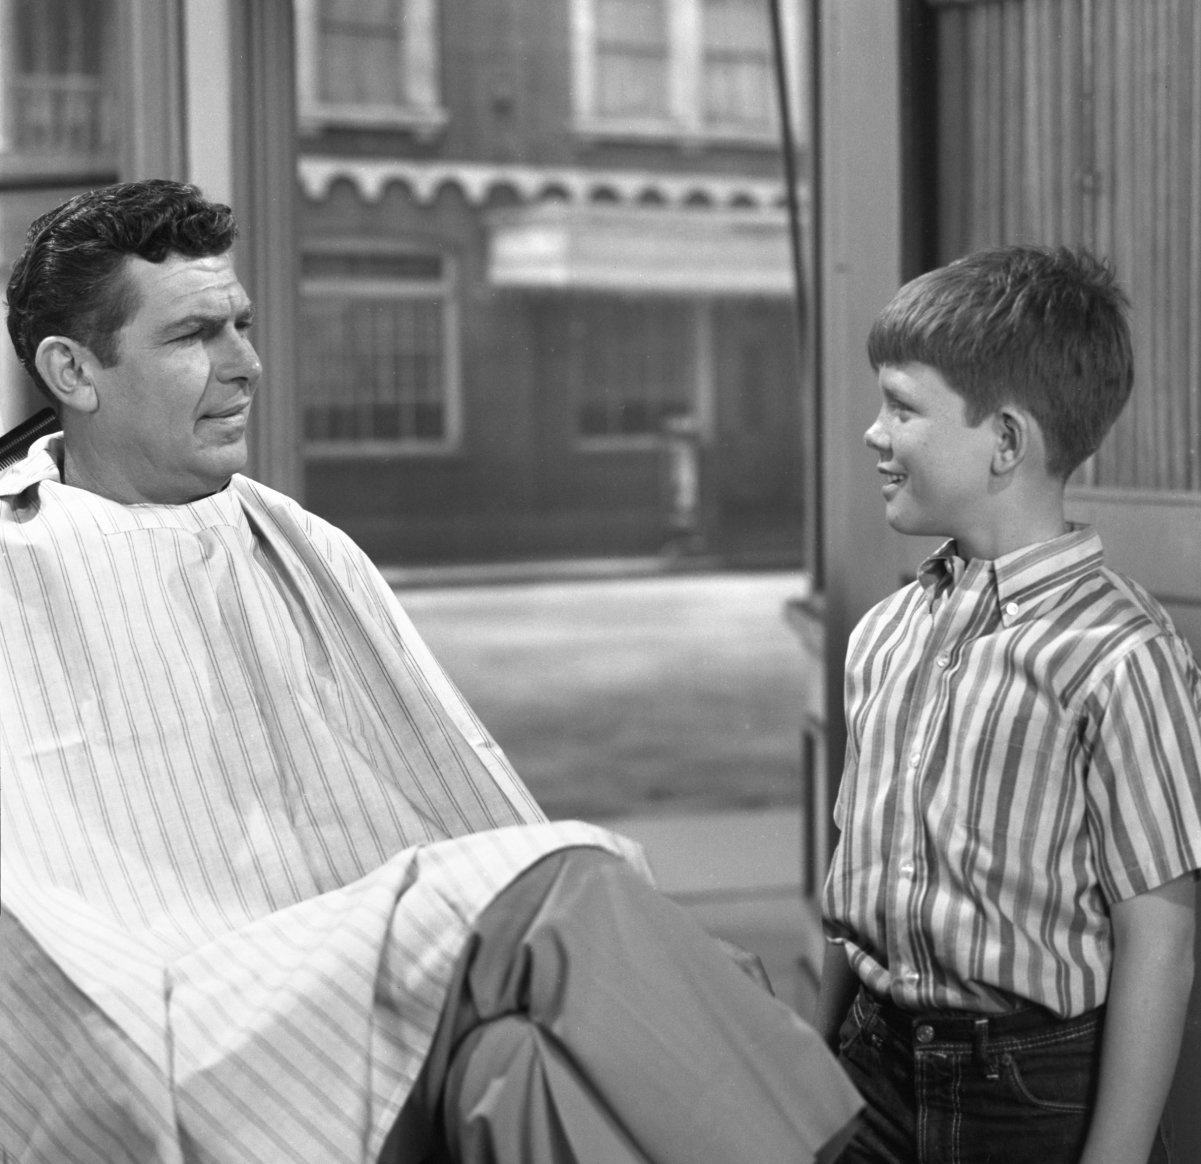 Actors Andy Griffith and Ron Howard chat in Floyd's barbershop in a scene from 'The Andy Griffith Show'